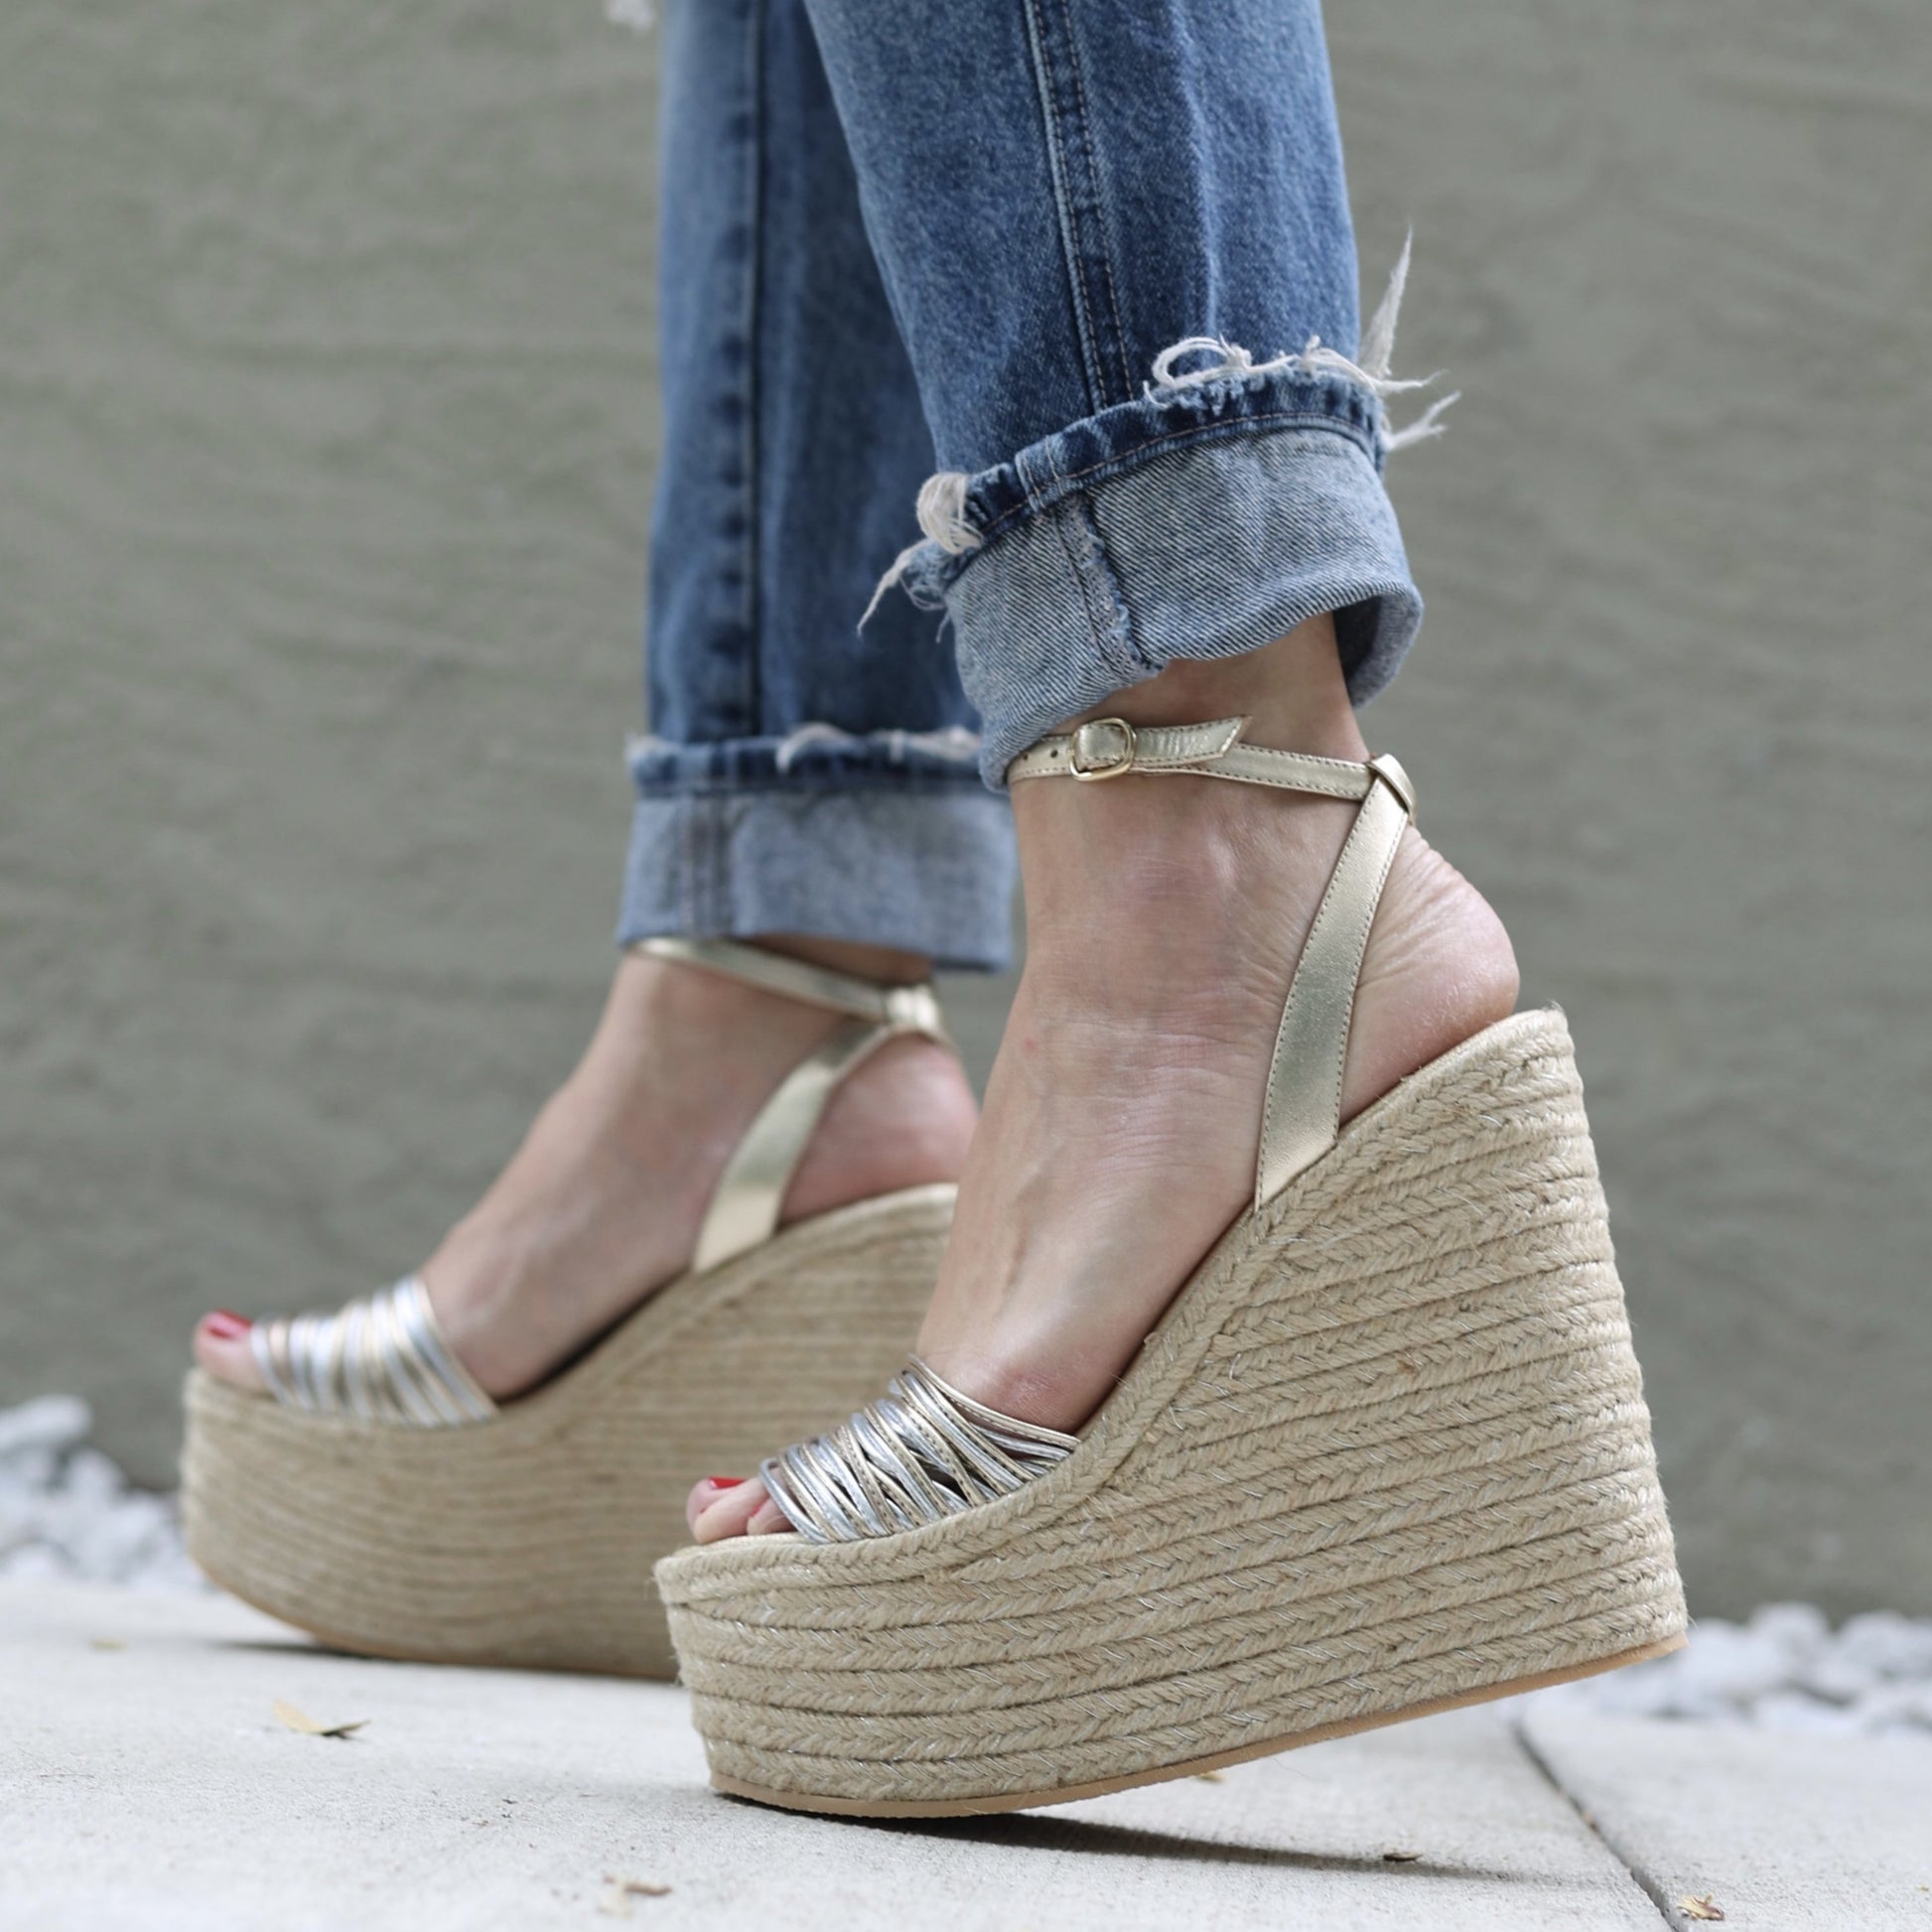 Holly Espadrilles by Nataly Mendez Genuine leather upper material Genuine leather insole lining Flexible rubber sole Handmade 5.5 inch high heel 2.5 inch platform